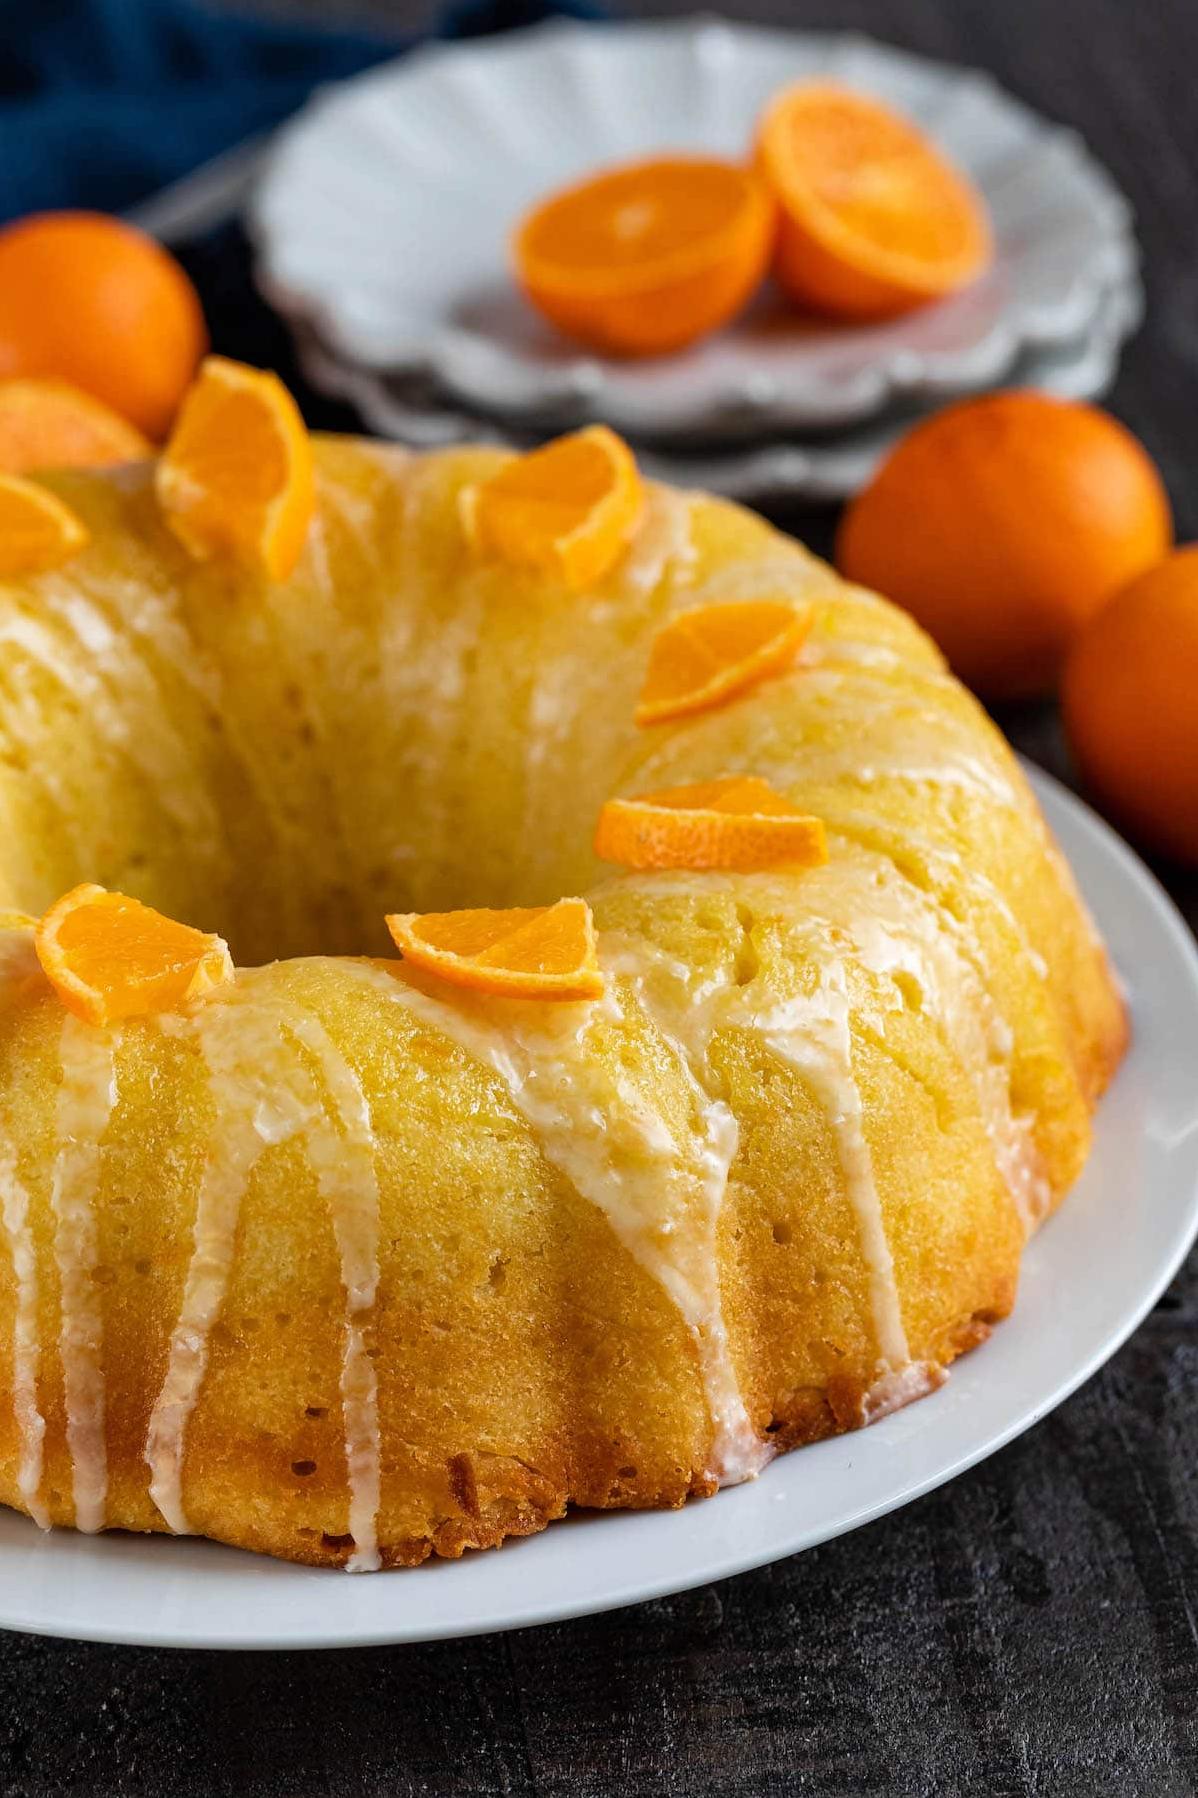  Baking this cake is like going on a tropical vacation without leaving your kitchen.